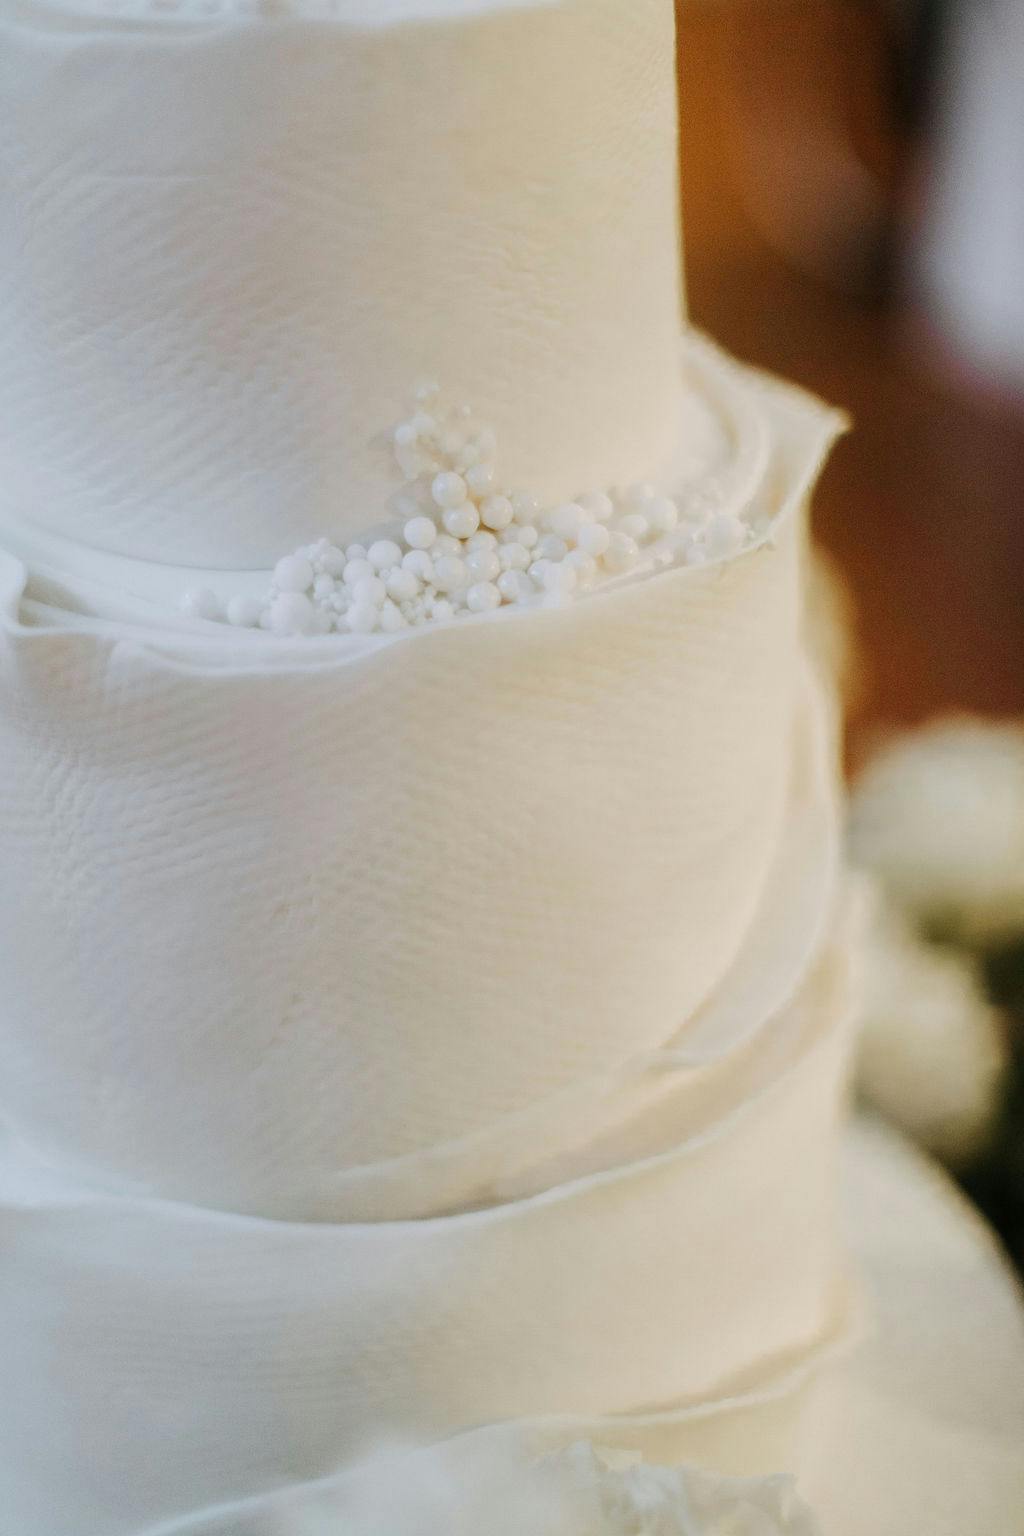 A close-up of a multi-tiered cake decorated to resemble rolls of toilet paper. The cake features realistic textures and detailing, with white fondant rolled and layered to mimic the appearance of toilet paper. Small white decorative elements add a touch of elegance.